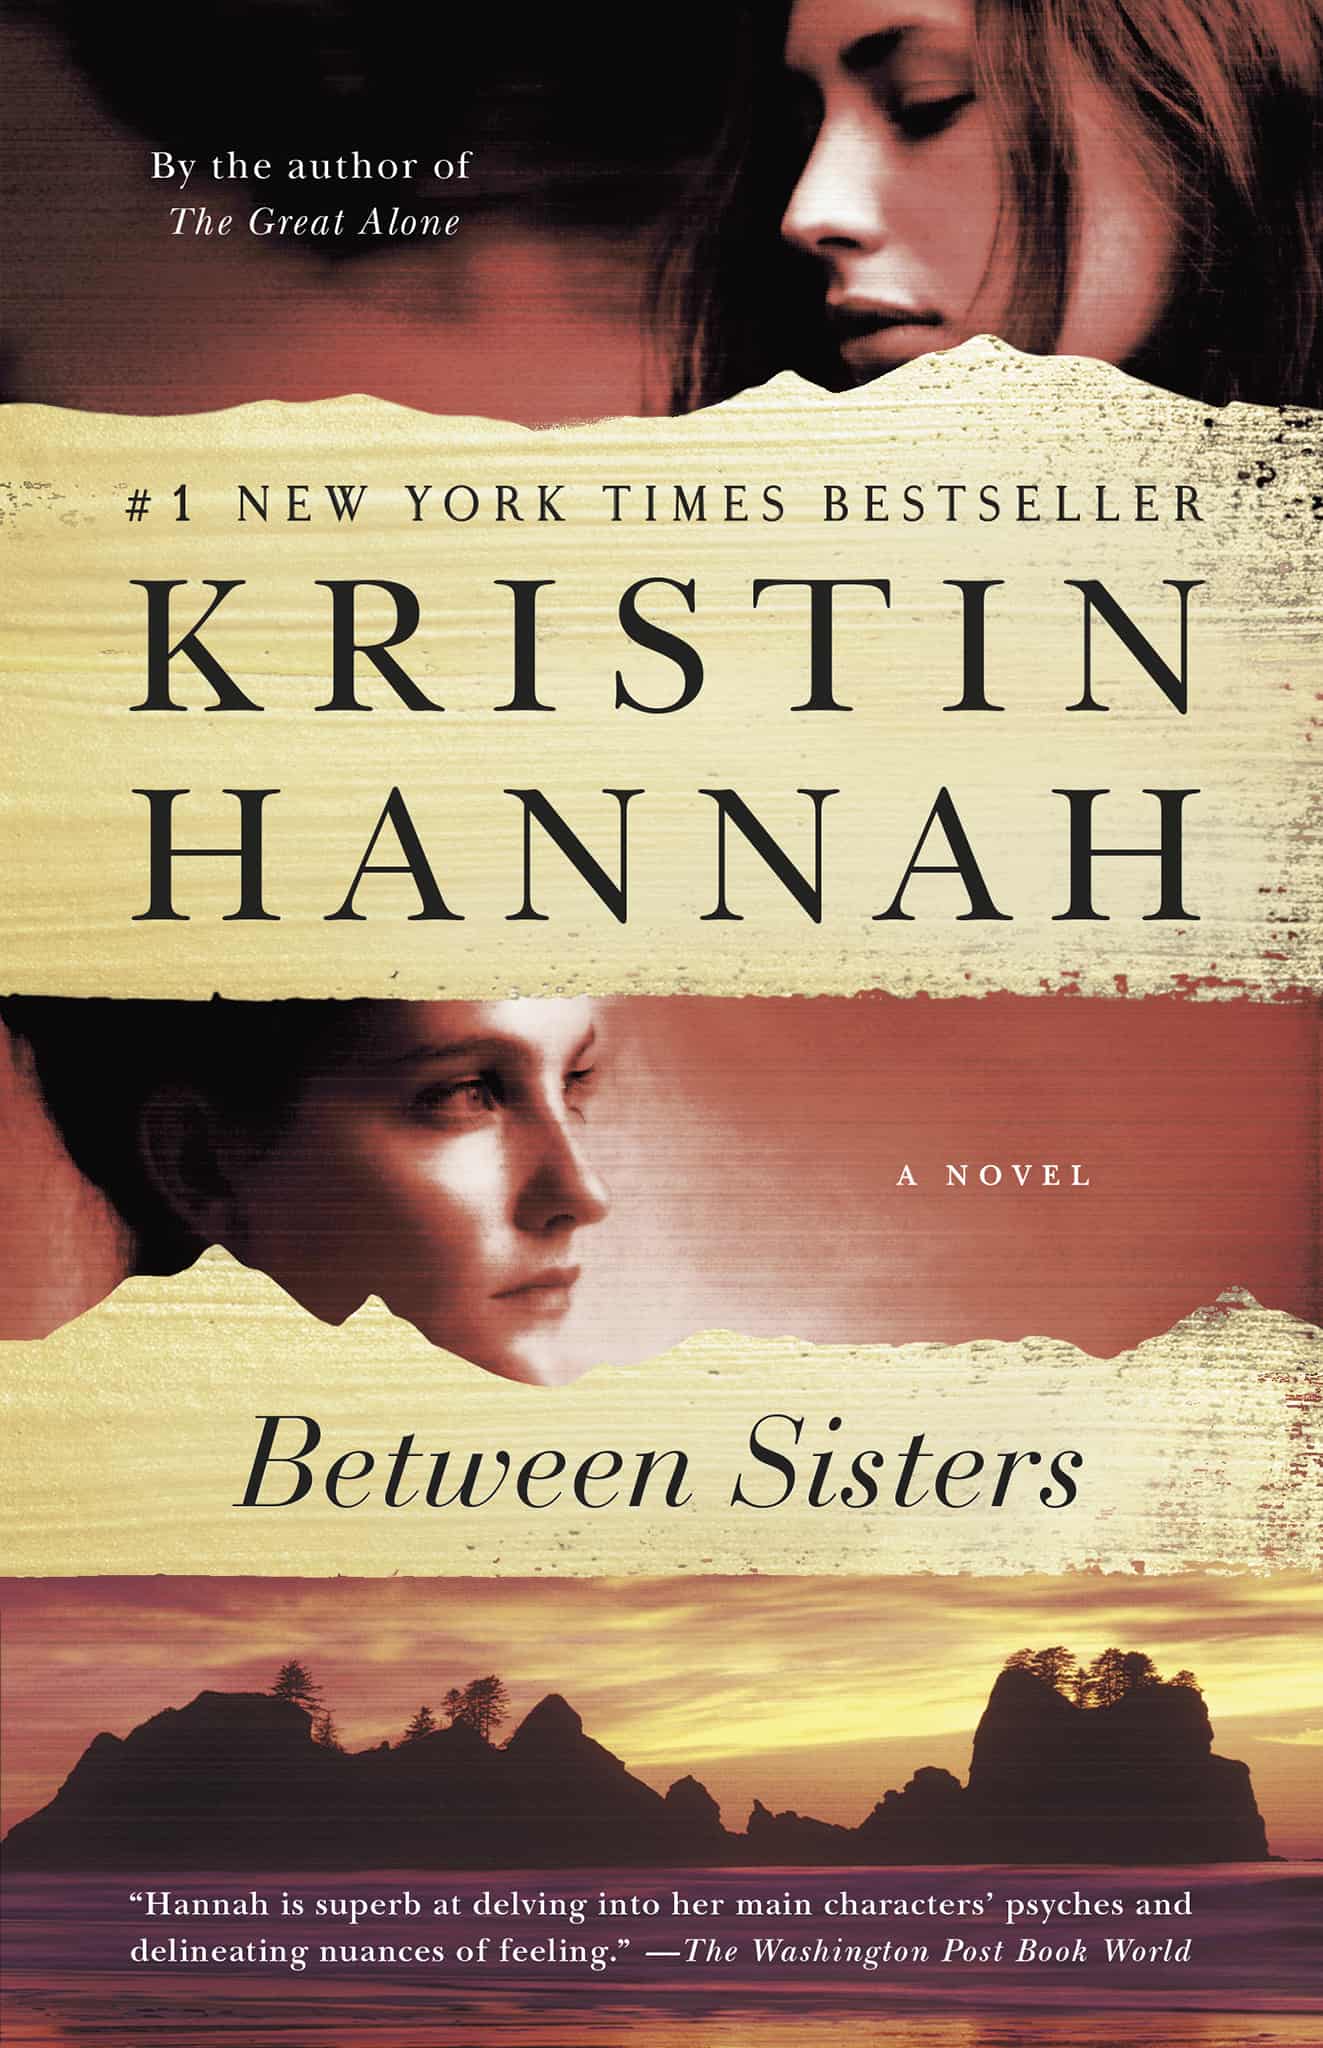 Readers Digest Condensed Books, Select Editions, Vol. 269, The Second Time  Around (MH Clark), Between Sisters (Kristin Hannah), the Guardian (Nicholas